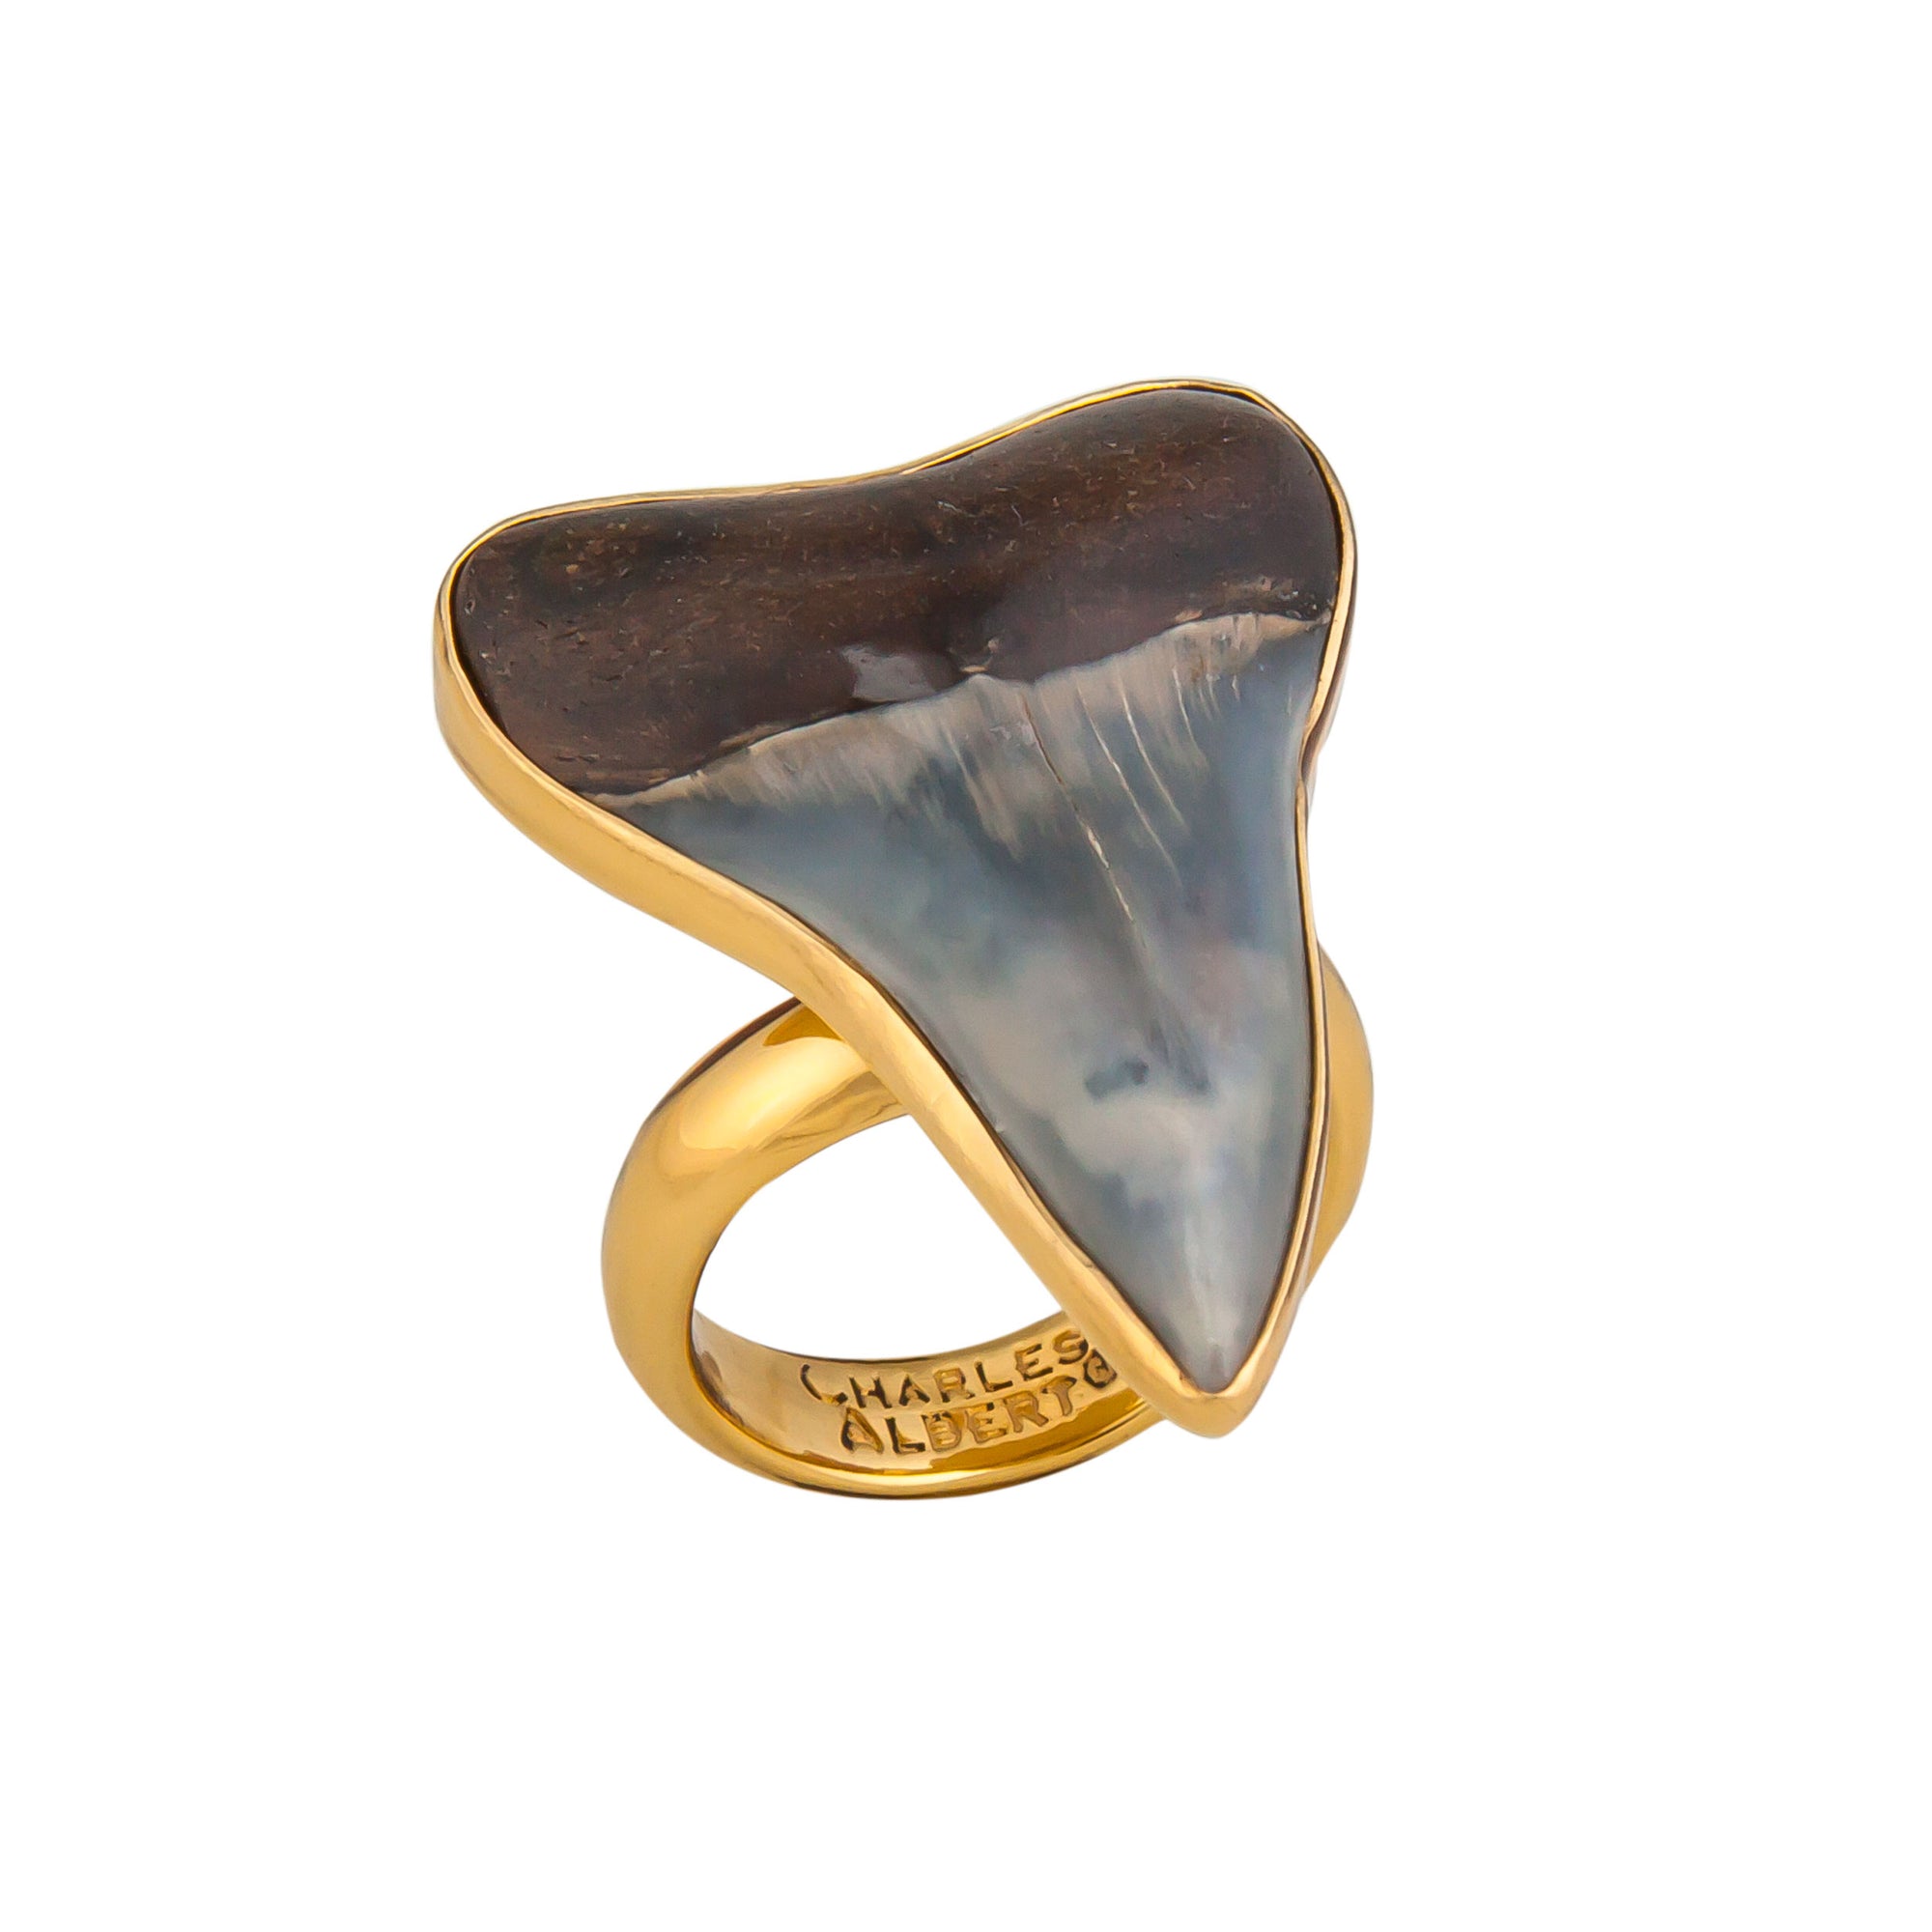 Alchemia Fossil Shark Tooth Adjustable Ring | Charles Albert Jewelry